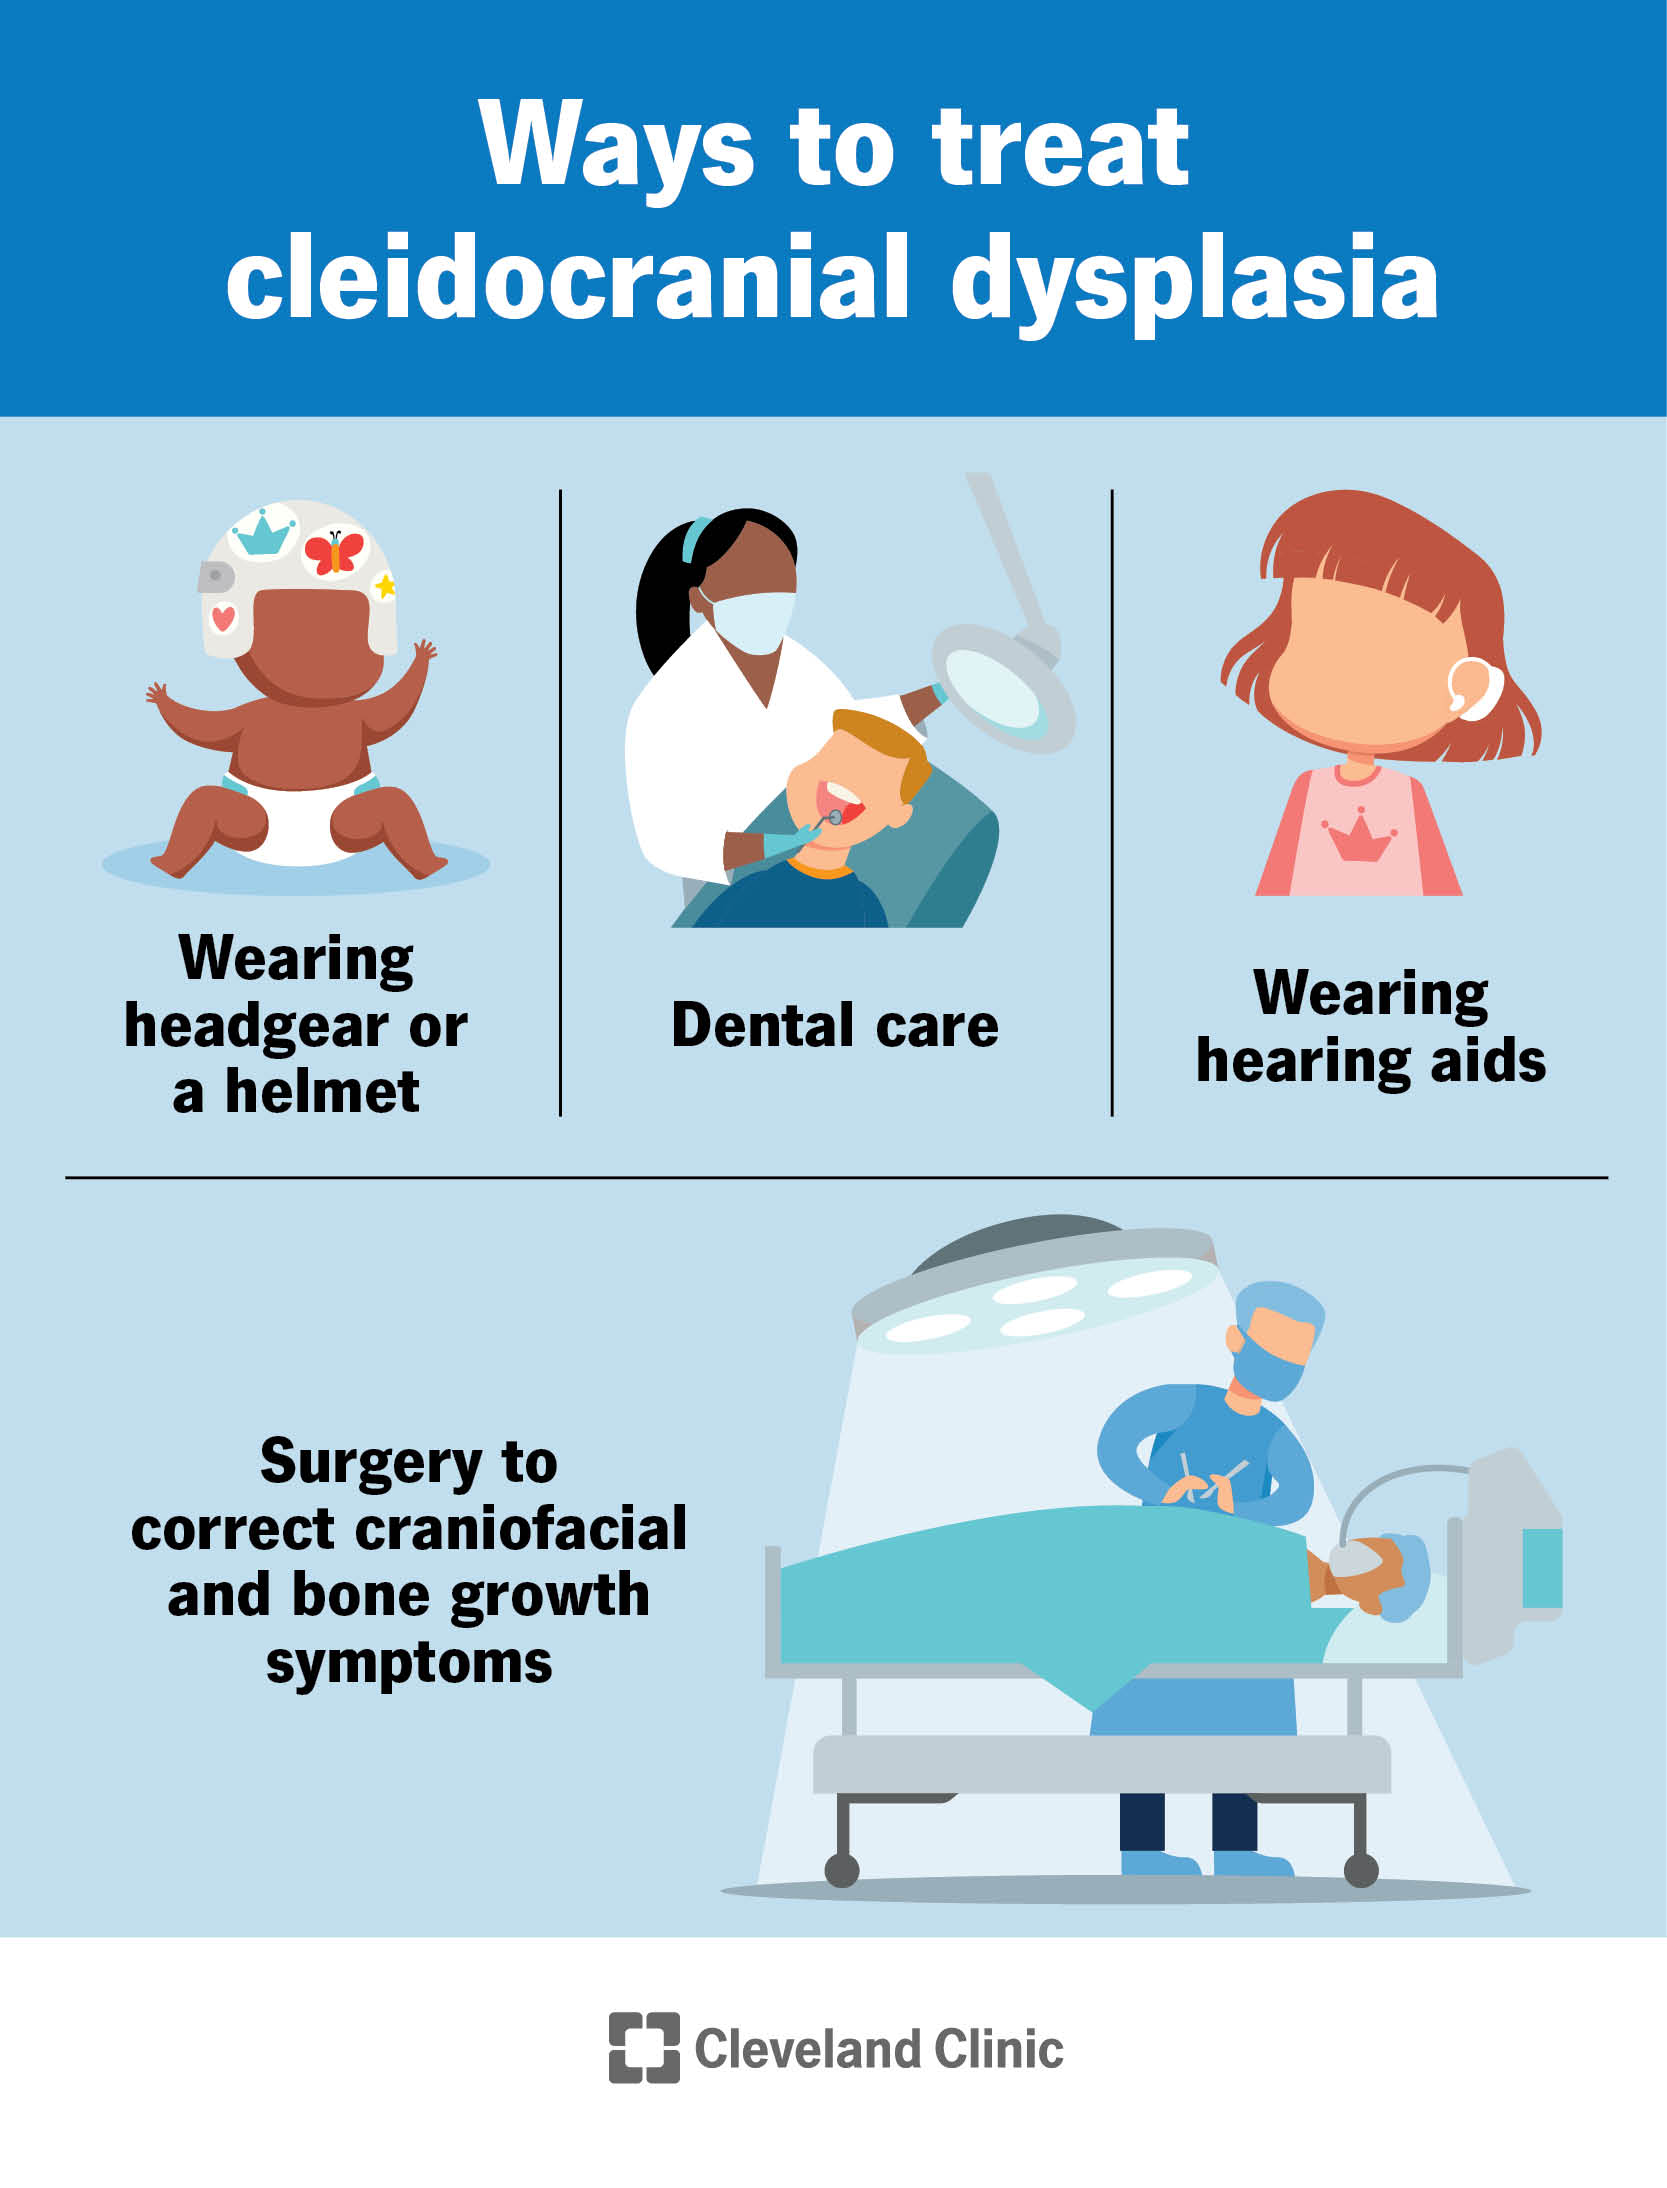 Treatment options for cleidocranial dysplasia include surgery to correct bone growth symptoms, dental care for their teeth, wearing headgear or a helmet during infancy and using devices like a hearing aid to improve hearing. 